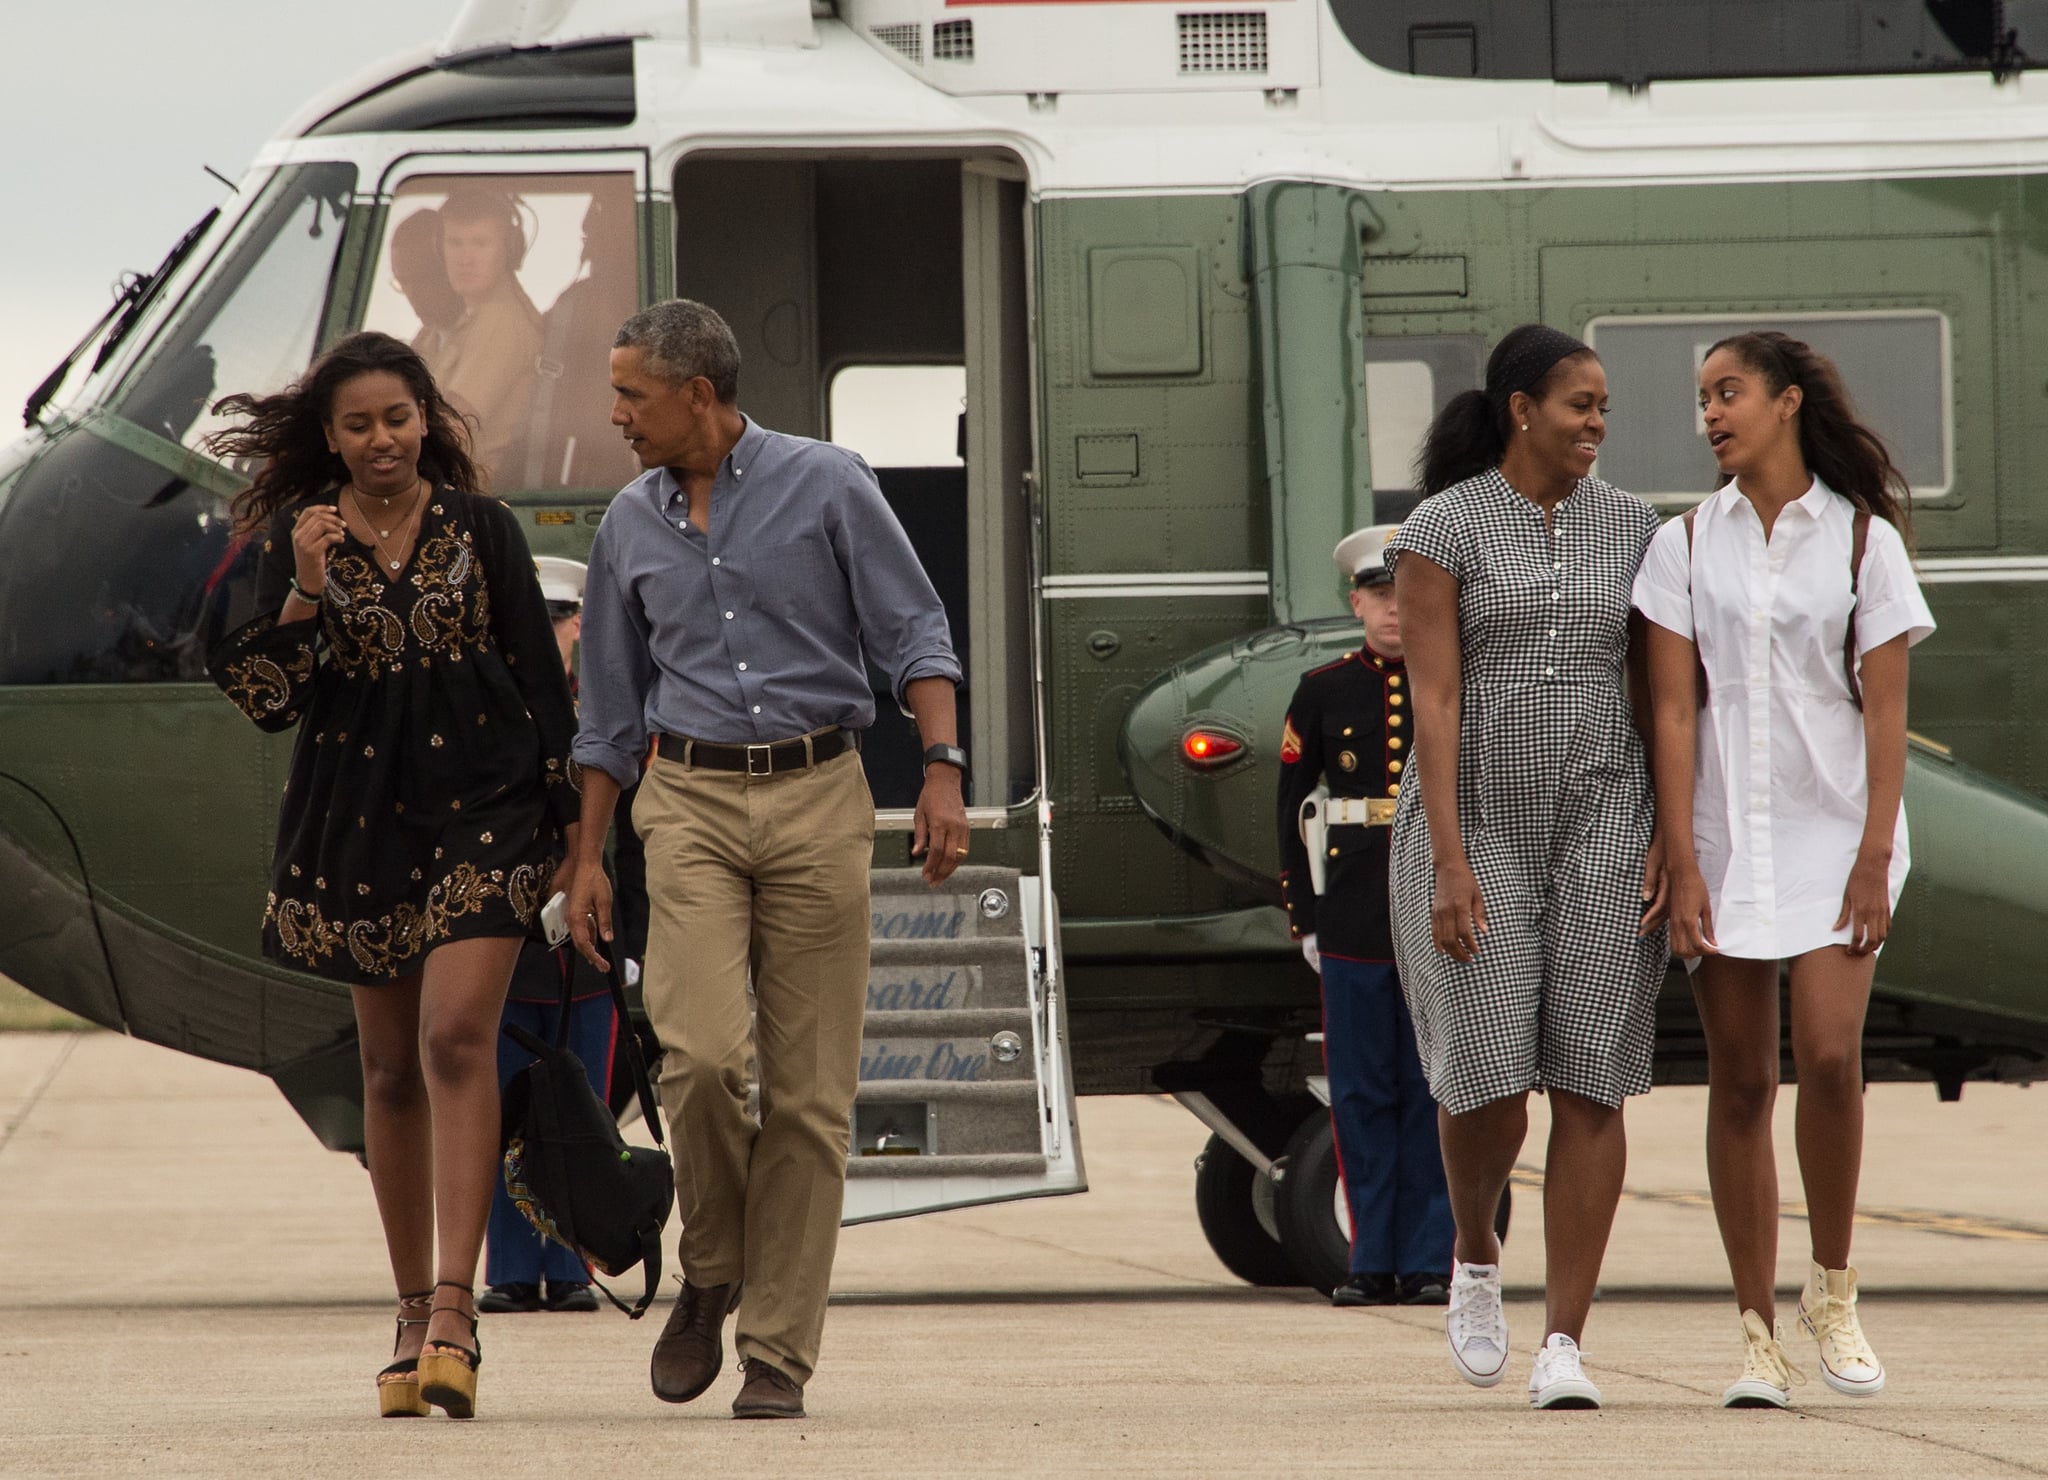 The whole family headed back to Washington DC after spending two weeks at Martha's Vineyard in August 2016.